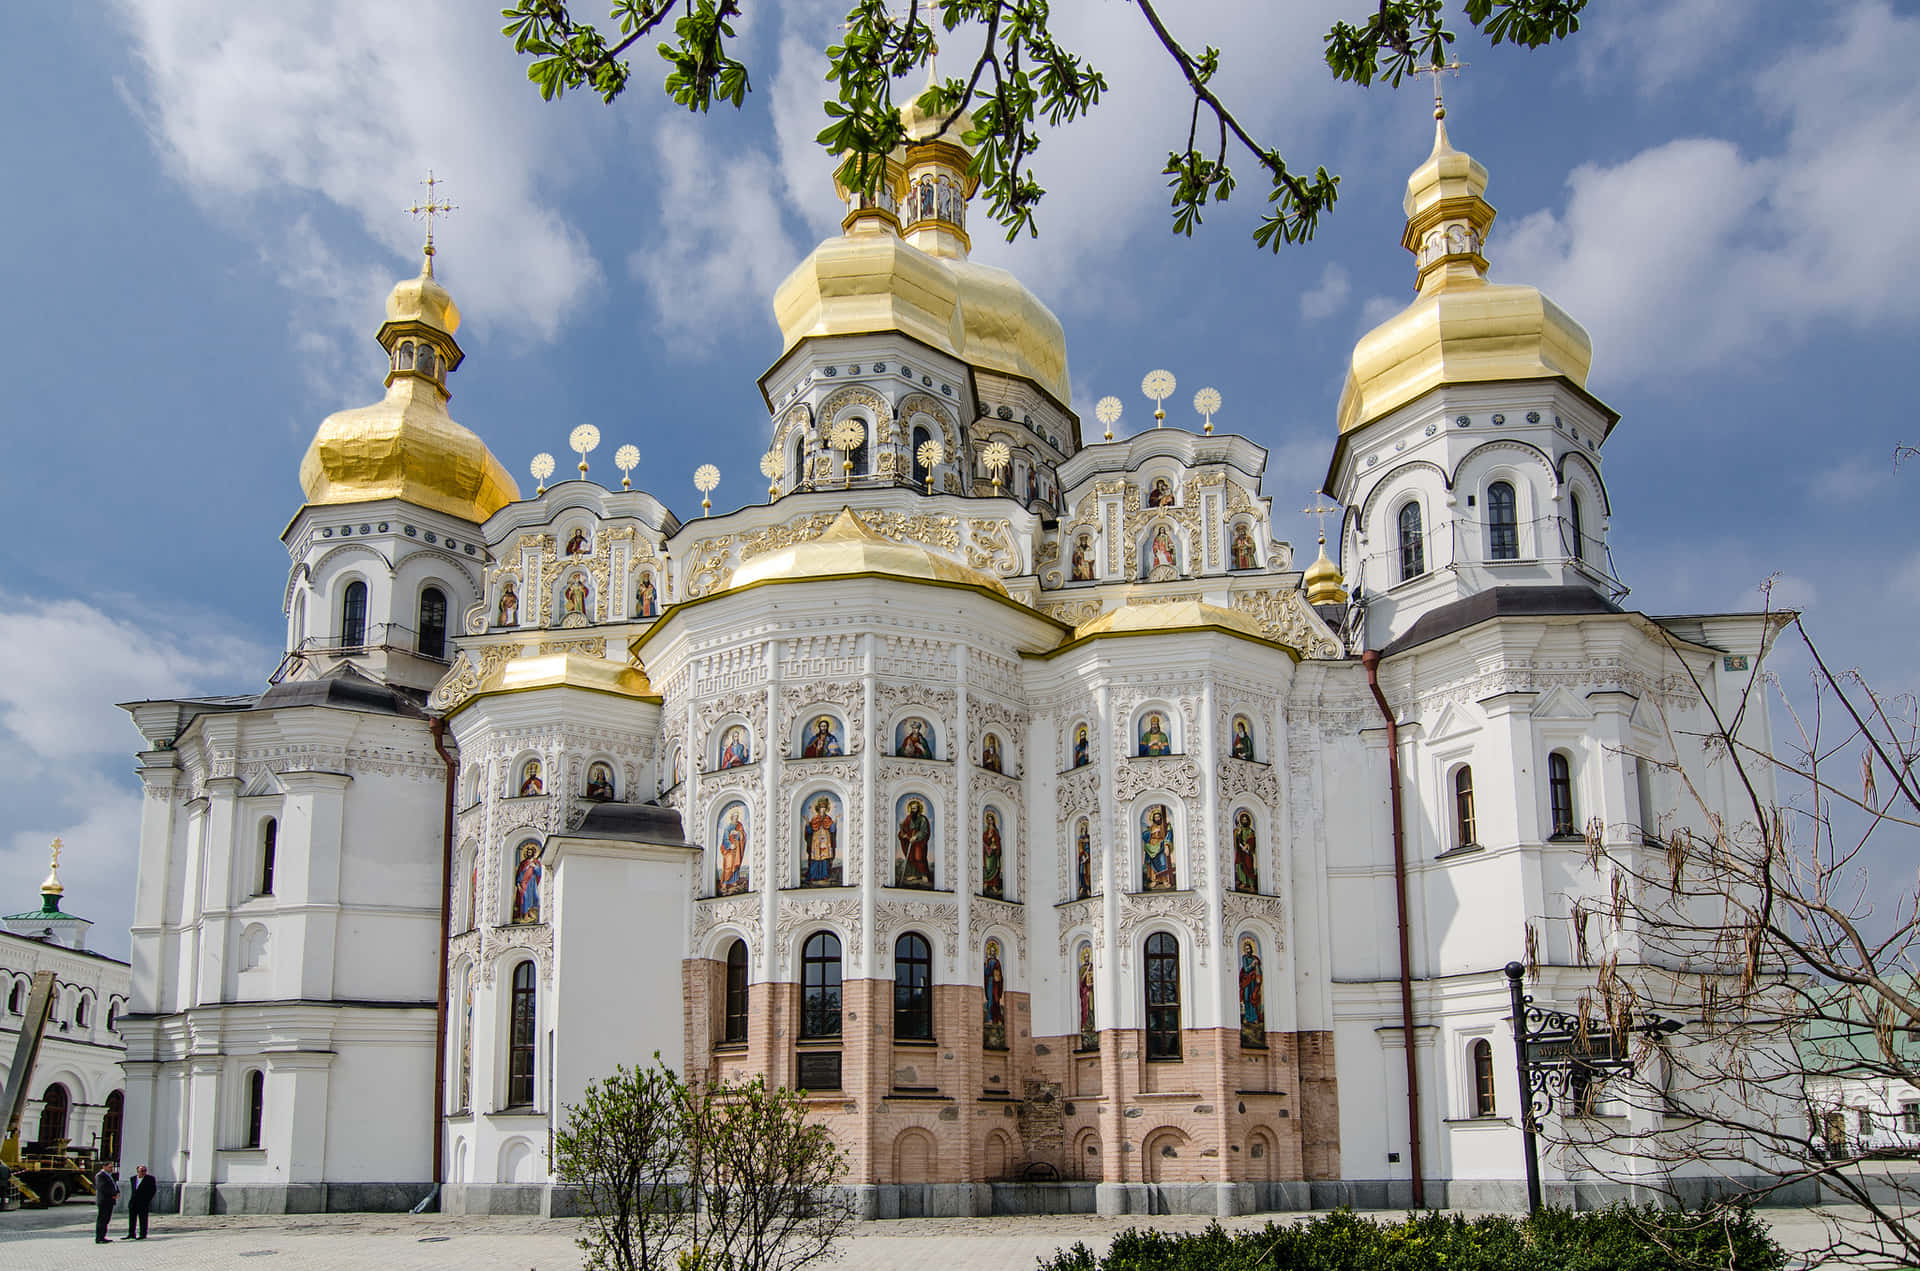 A White Building With Gold Domes